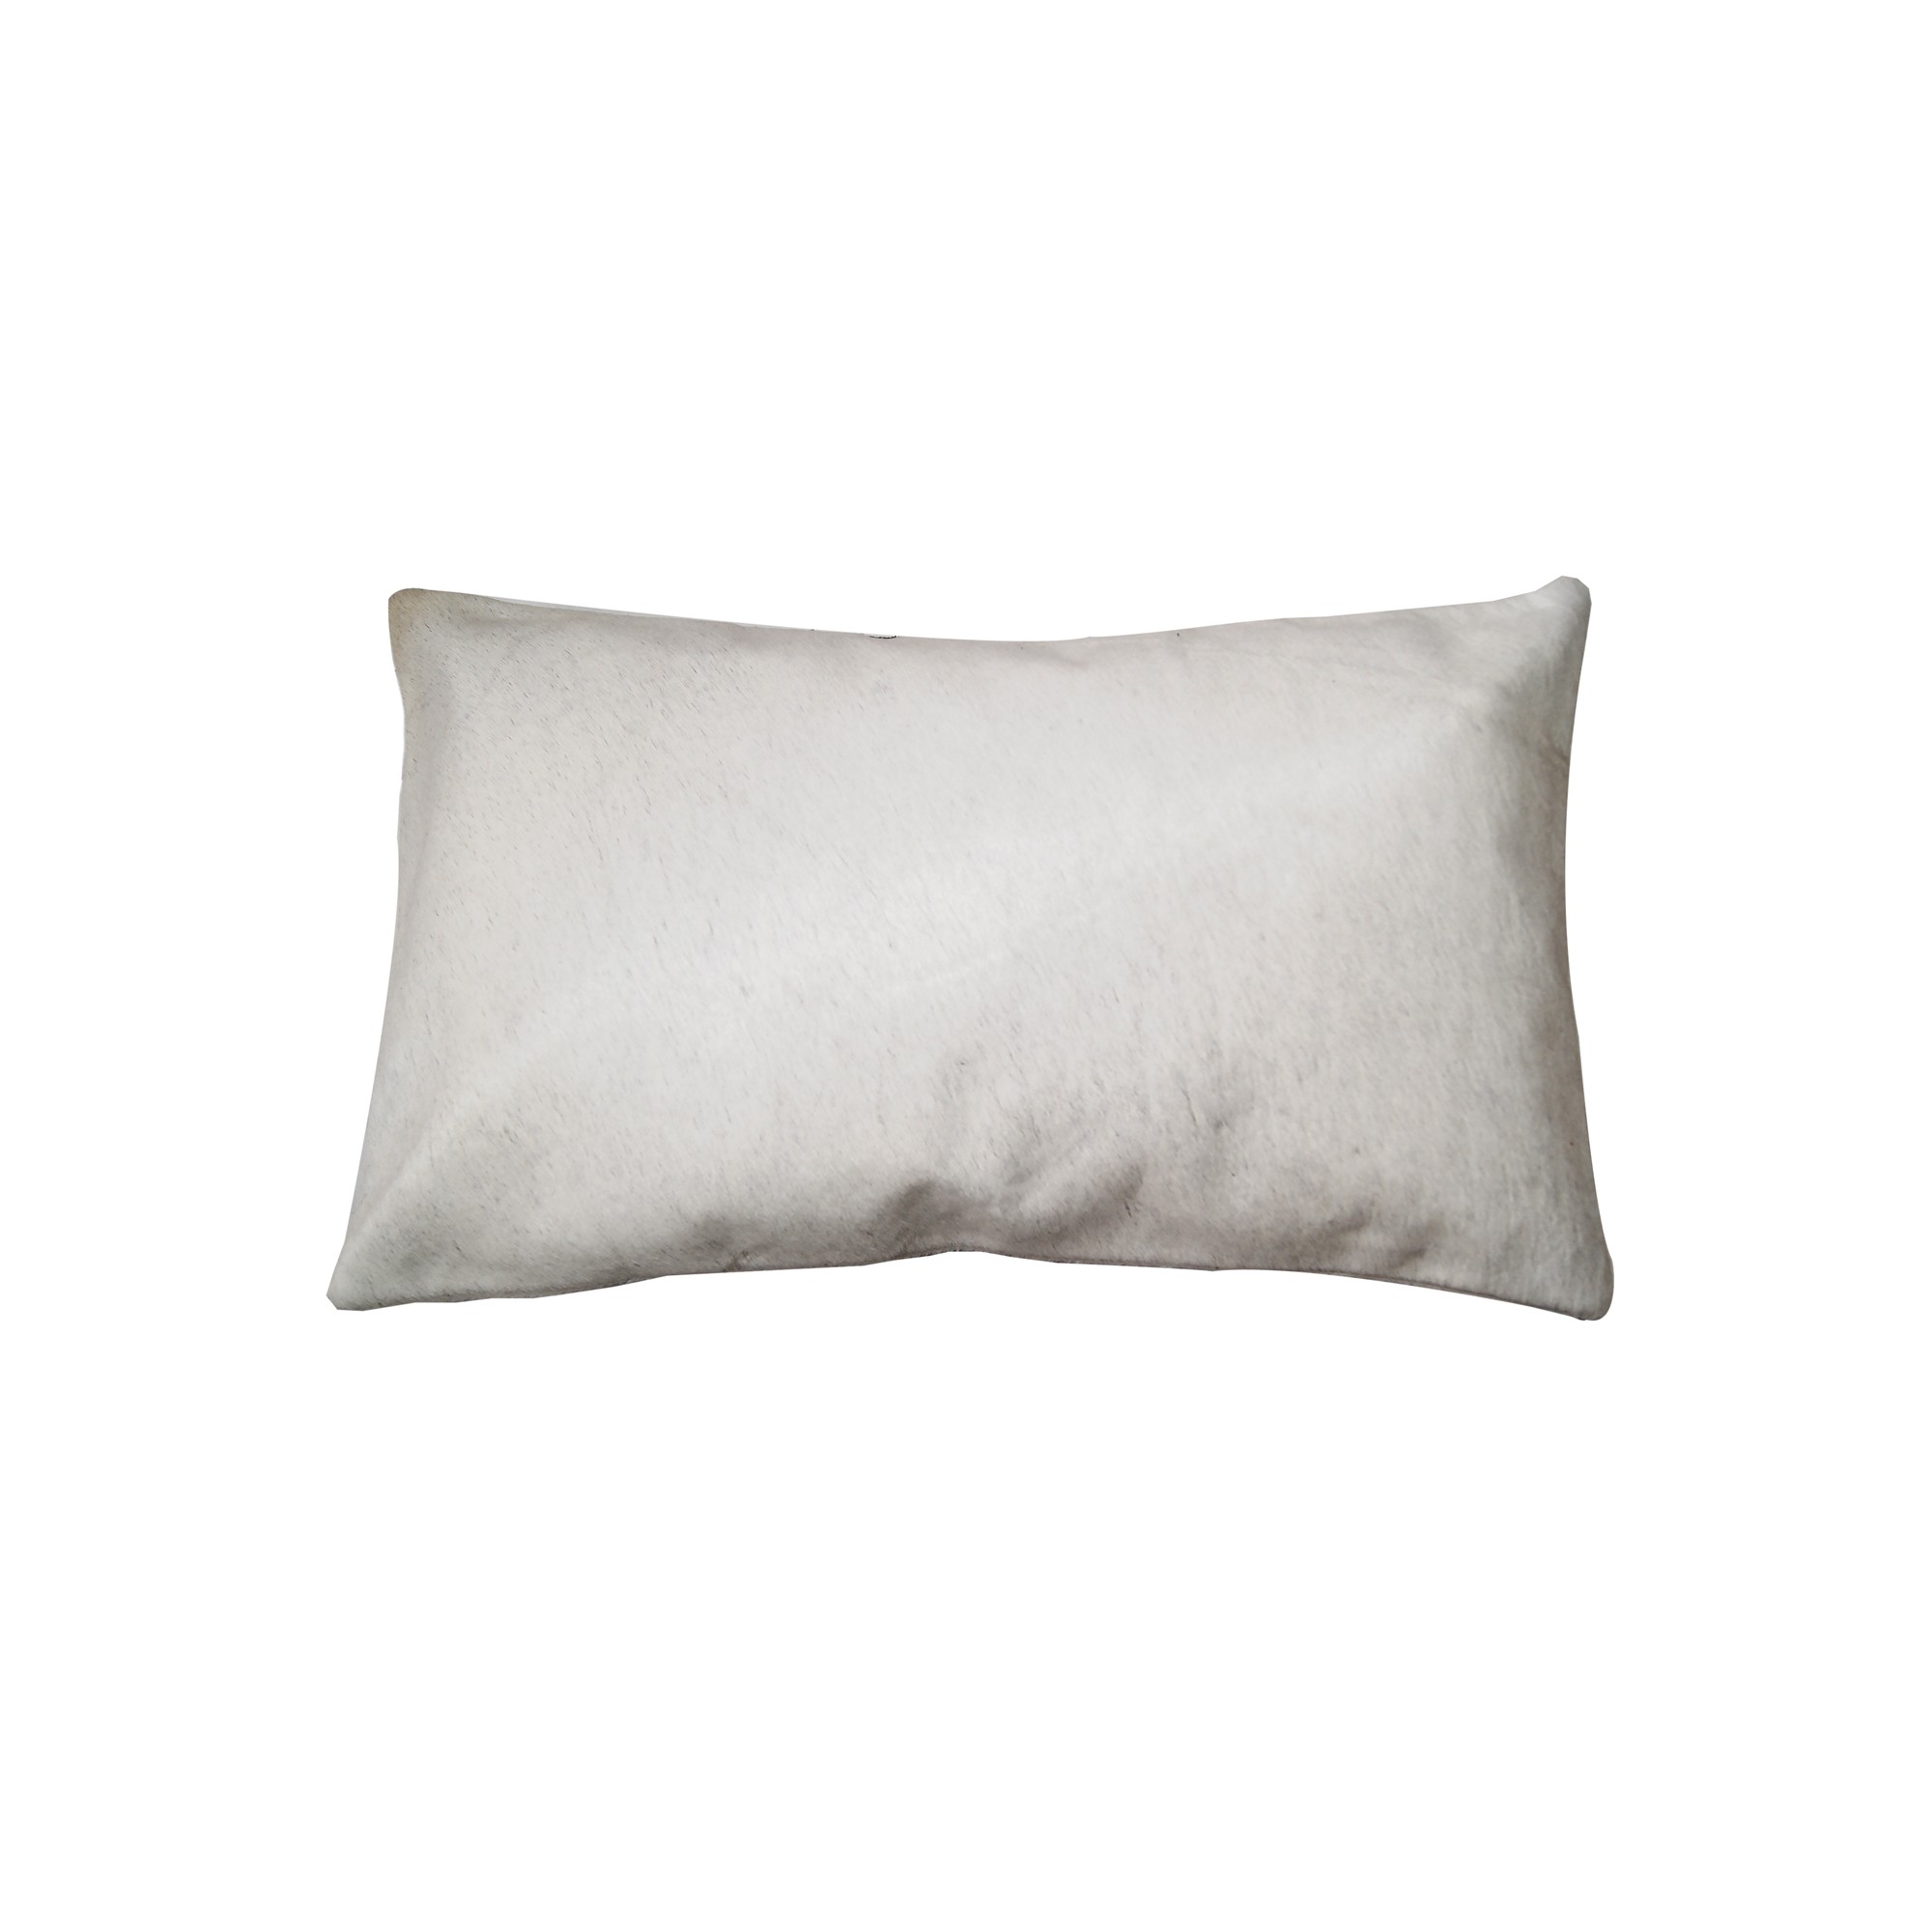 12" x 20" x 5" Off White Cowhide - Pillow